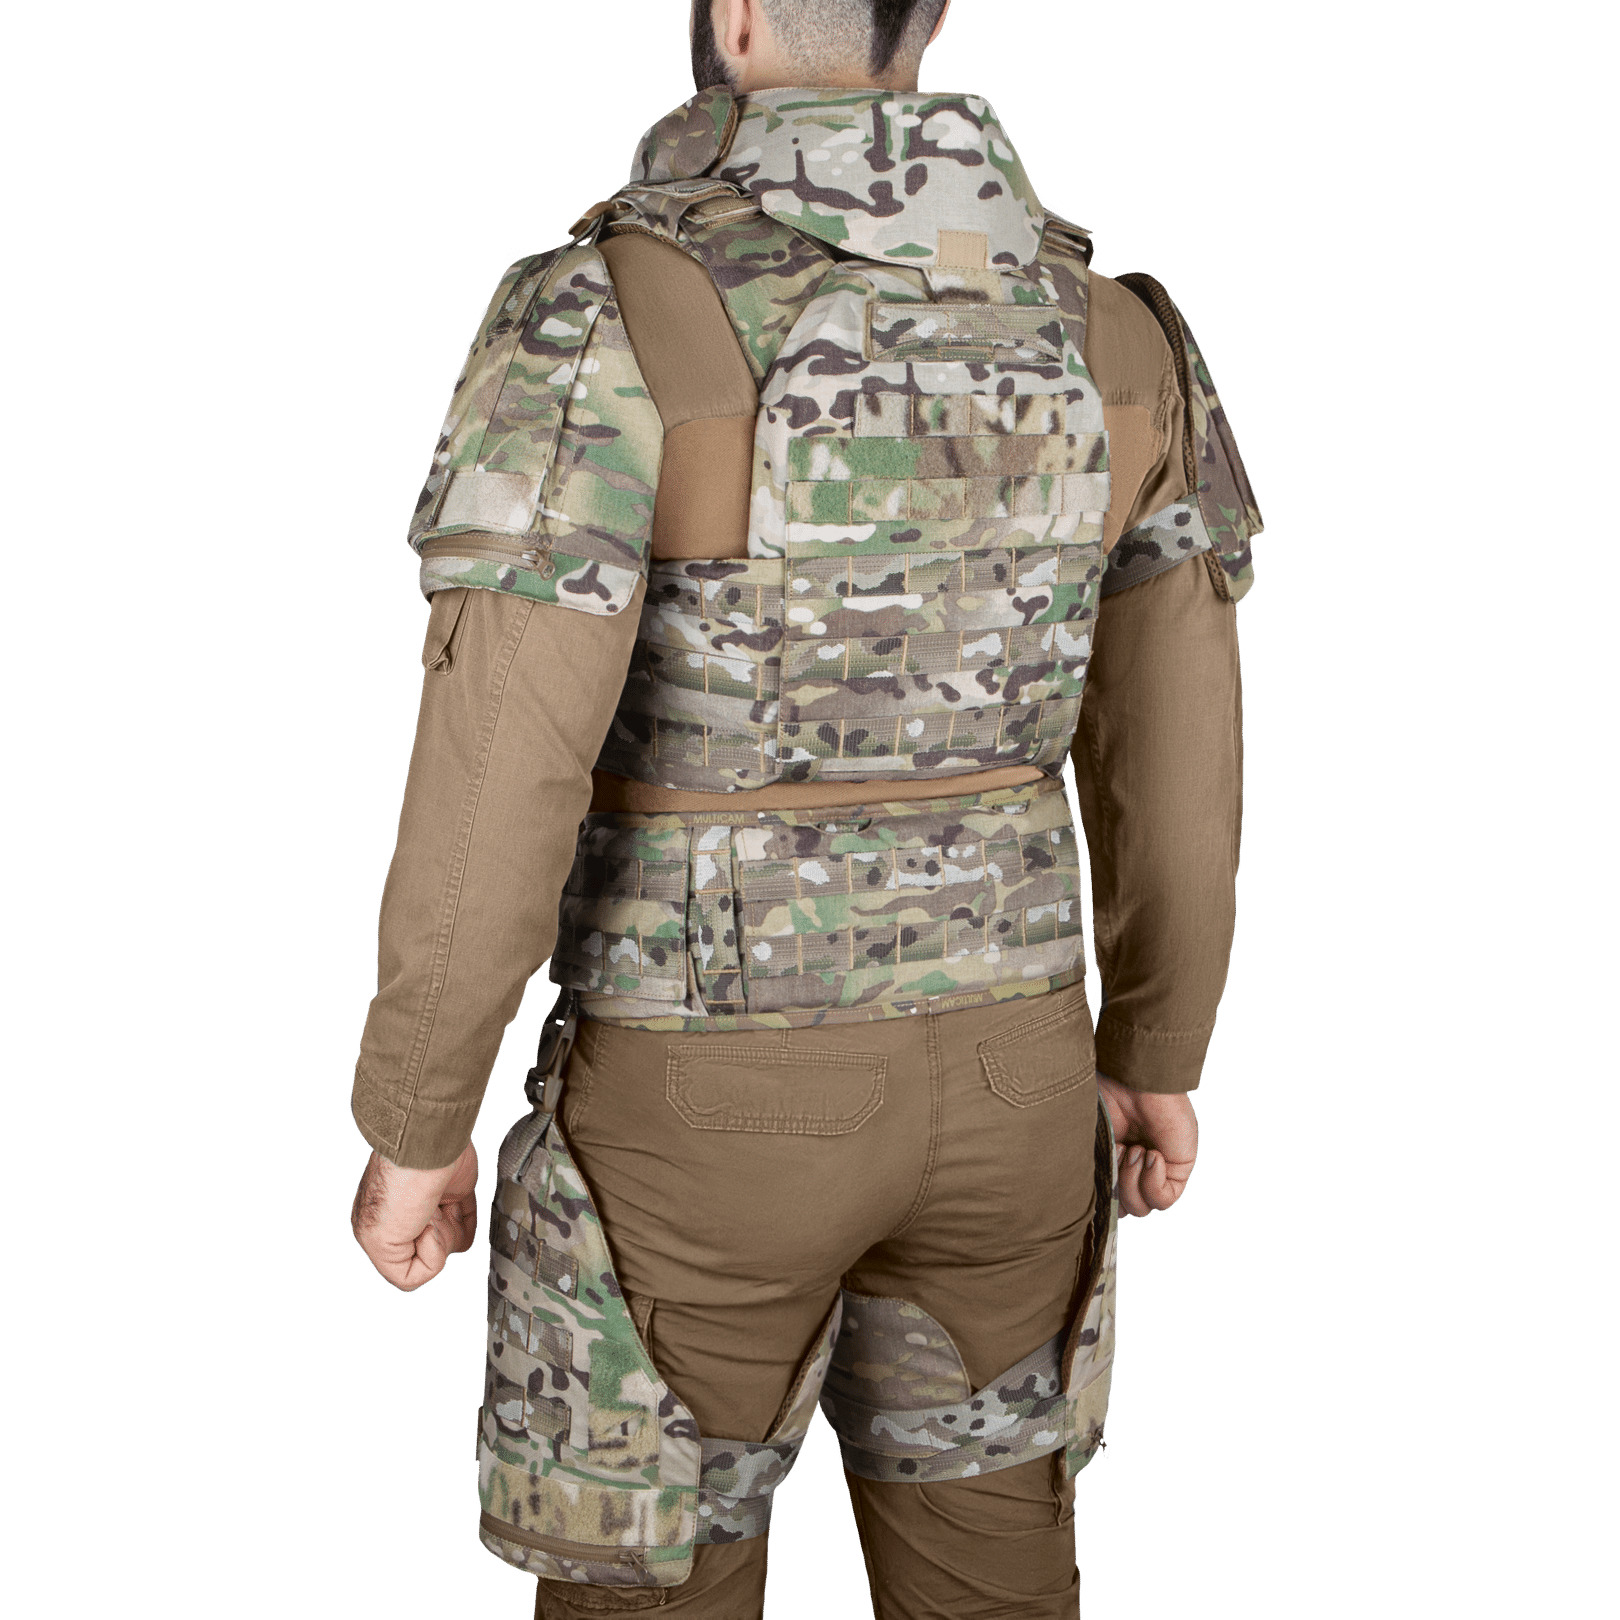 Full Body Armour Protect Suit Jacket